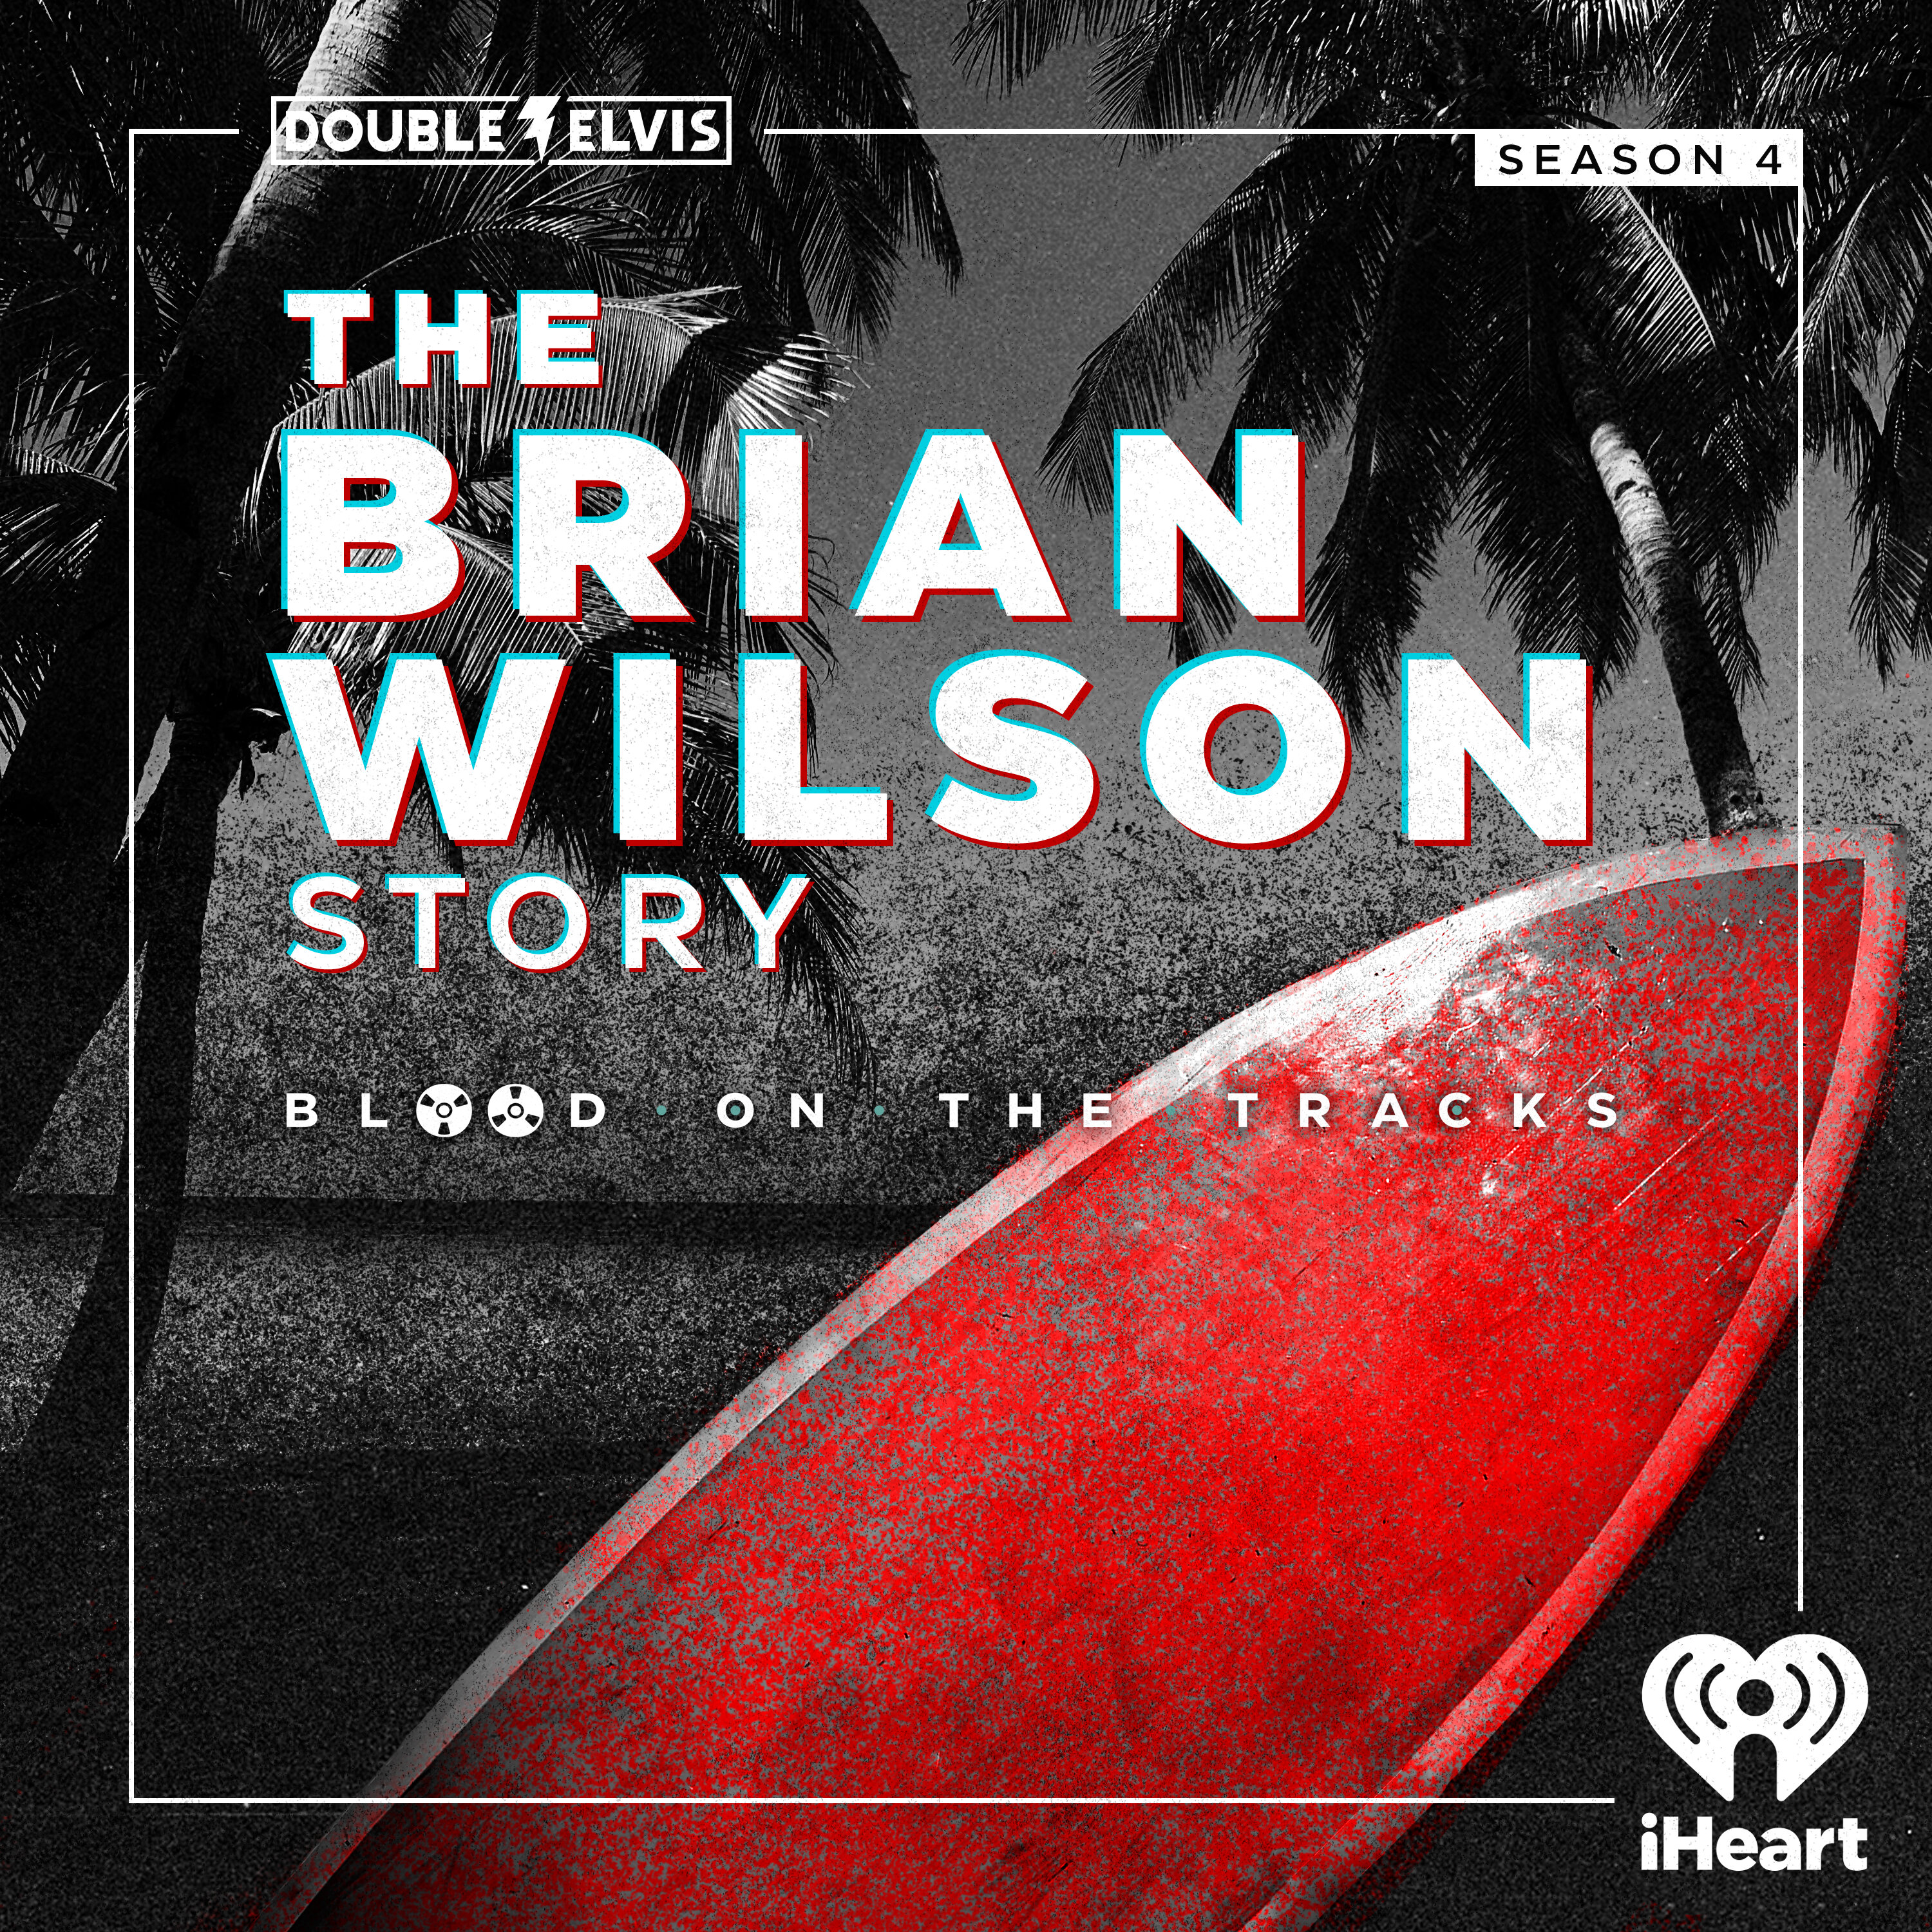 BLOOD ON THE TRACKS Season 4: The Brian Wilson Story podcast show image